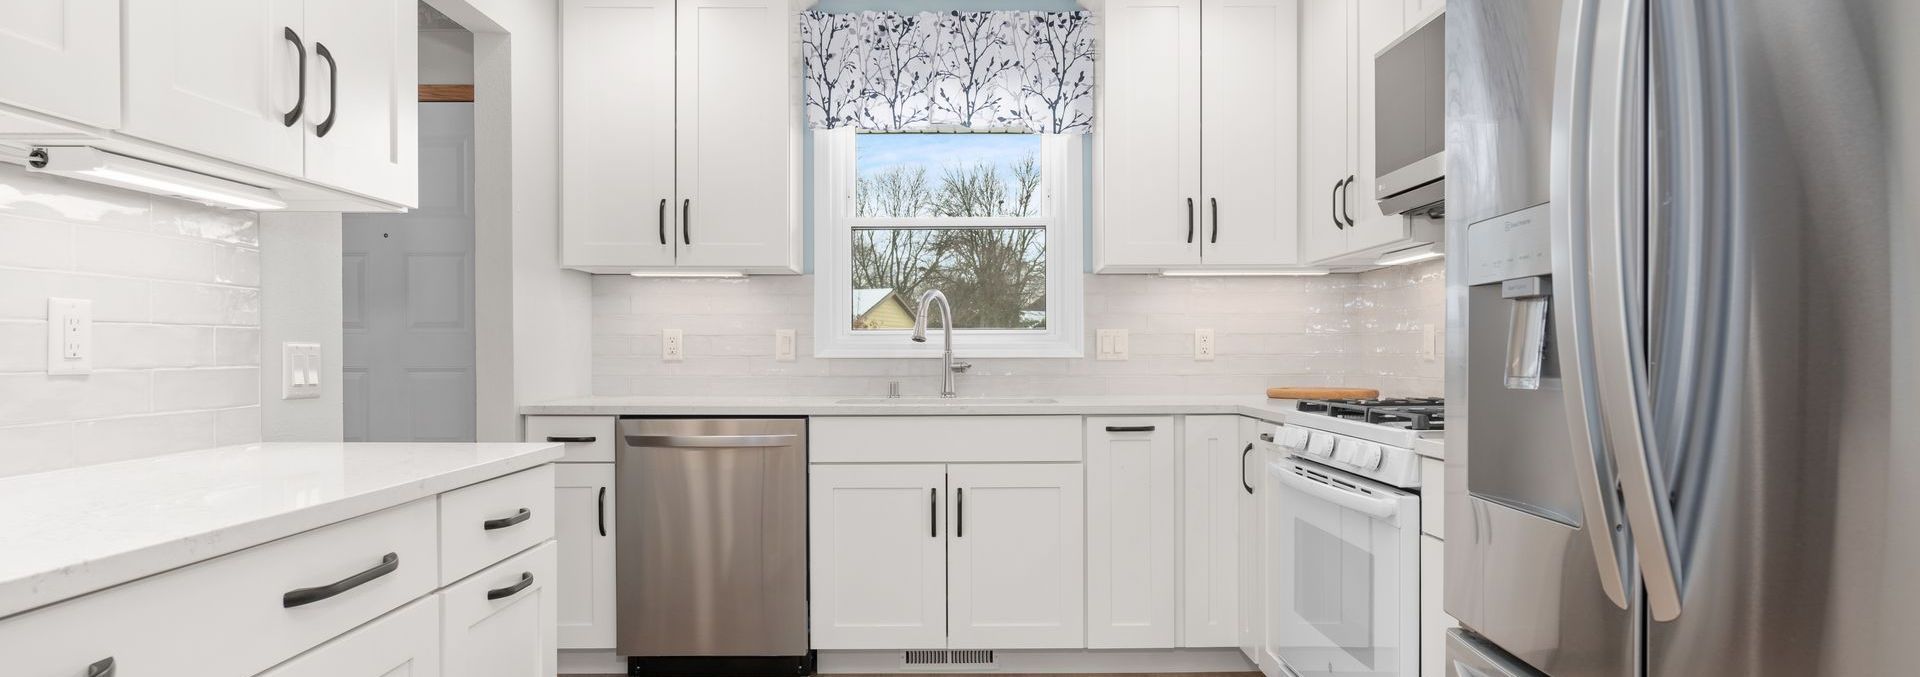 A kitchen with white cabinets , stainless steel appliances , and a window.